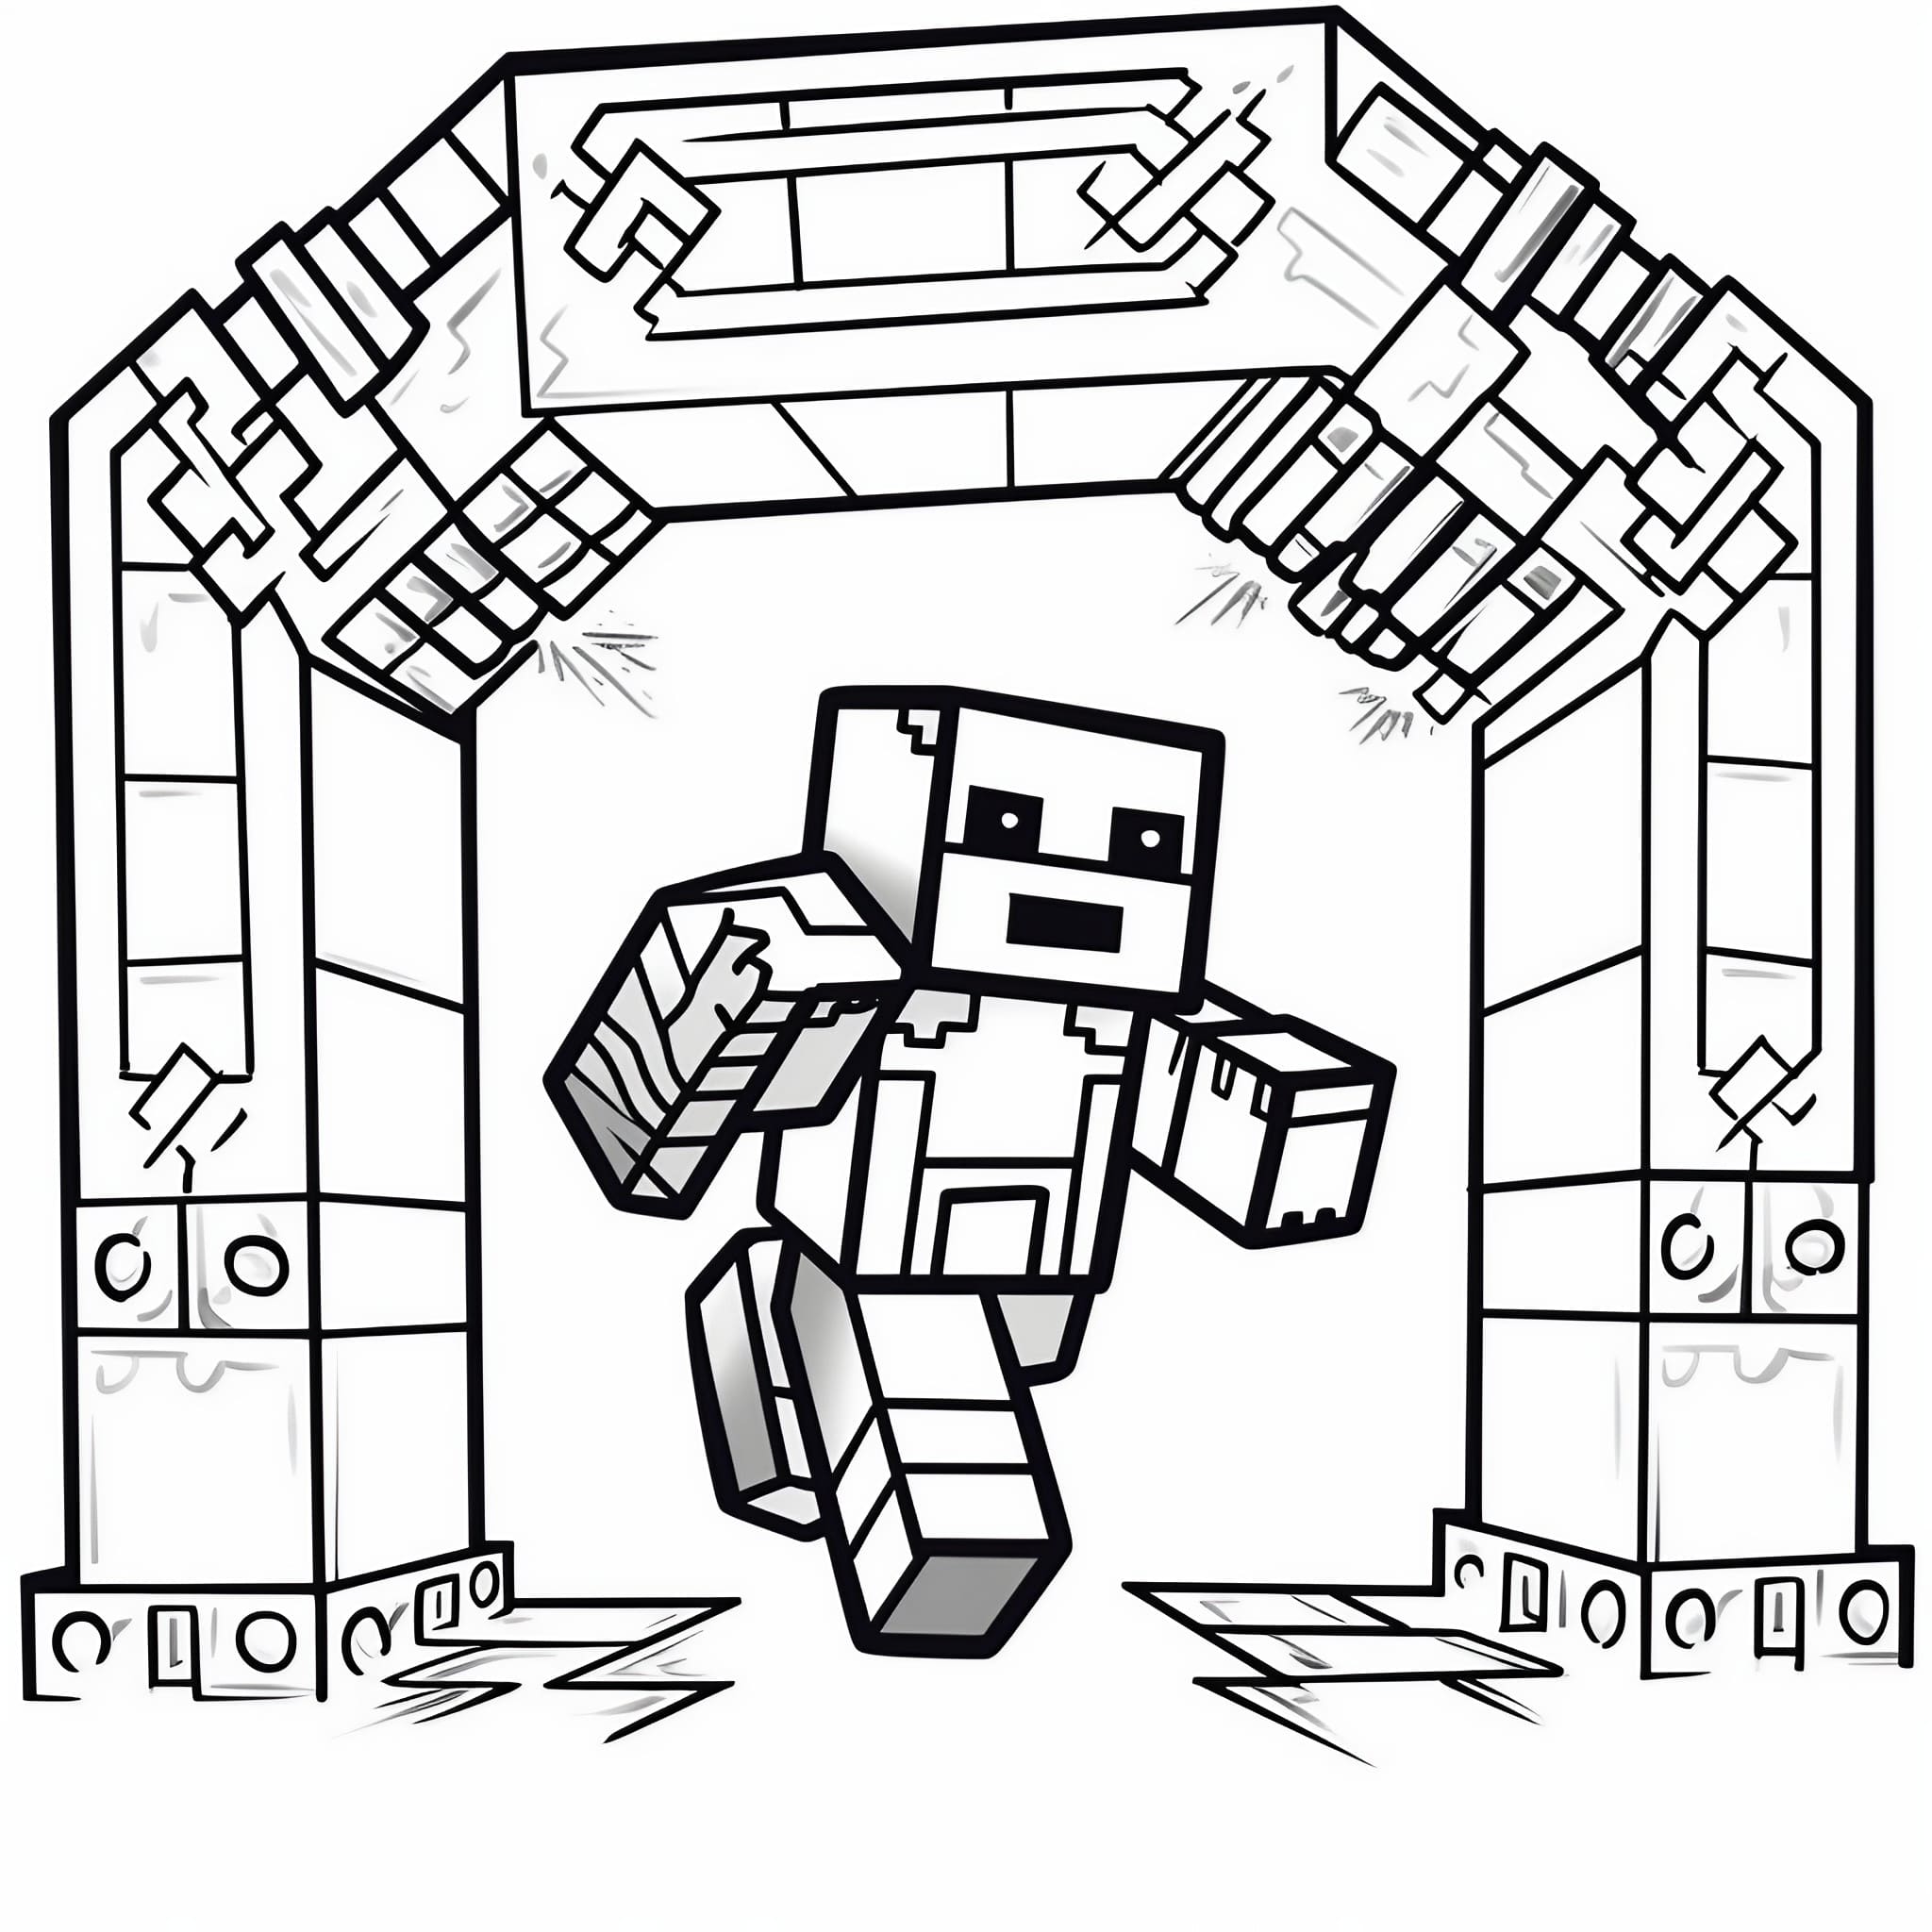 5 Minecraft Coloring Pages for Free ...